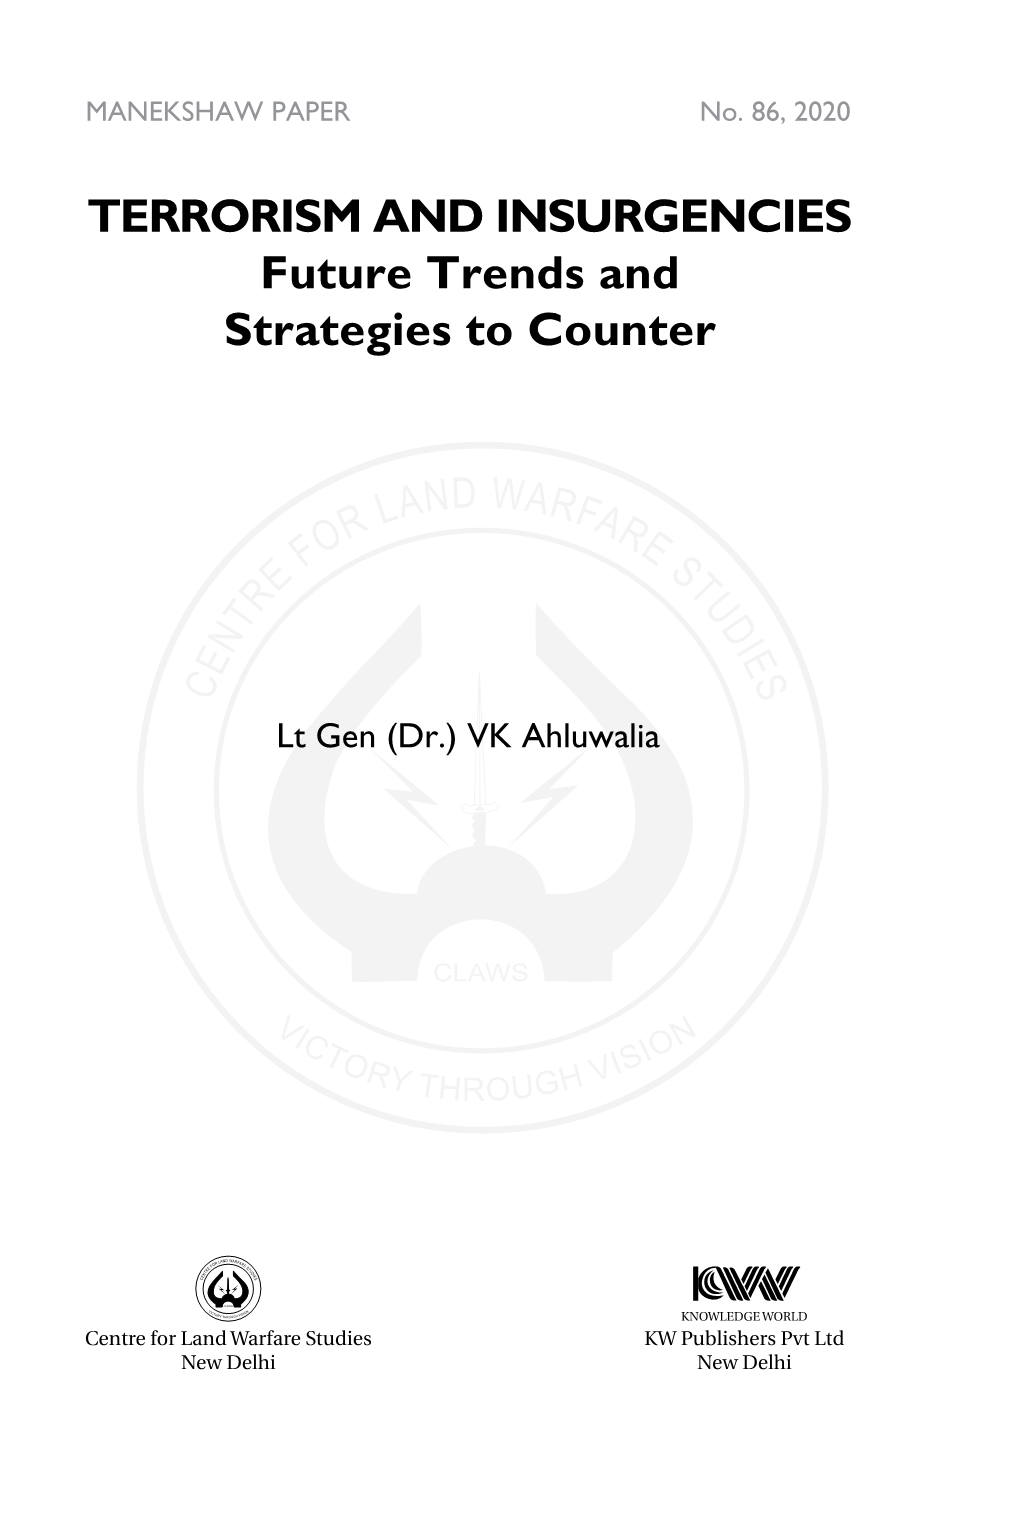 Terrorism and Insurgencies Future Trends and Strategies to Counter